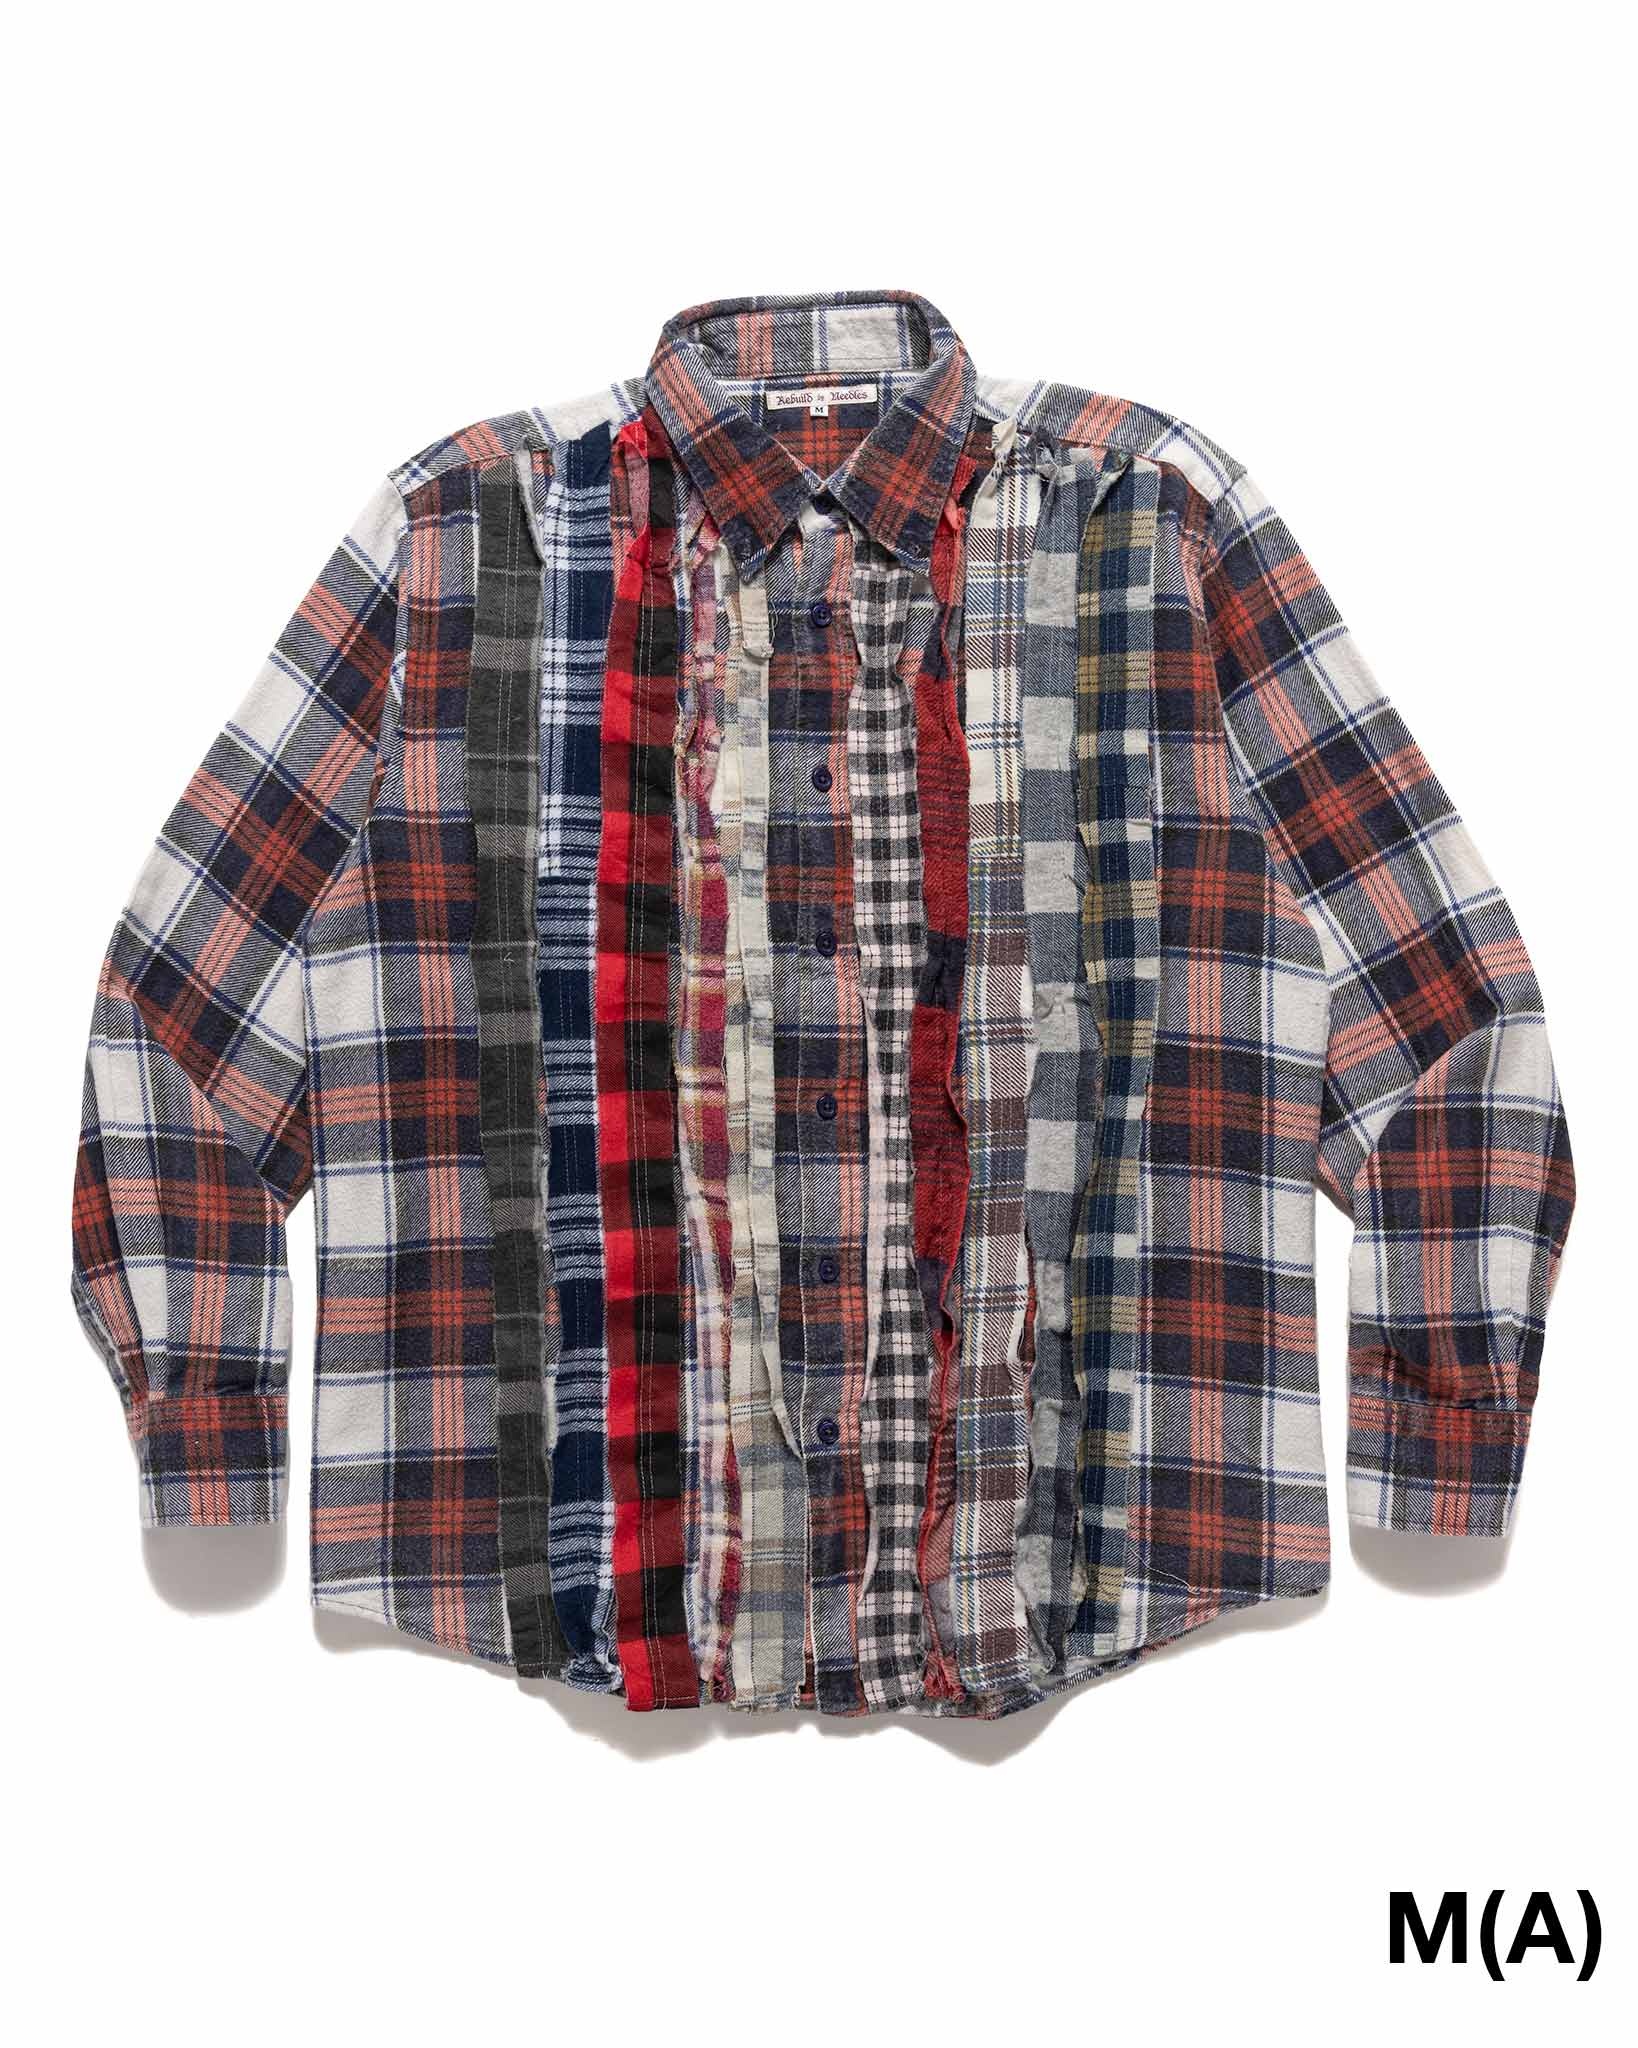 Rebuild by Needles Flannel Shirt -> Ribbon Shirt Assorted - 9